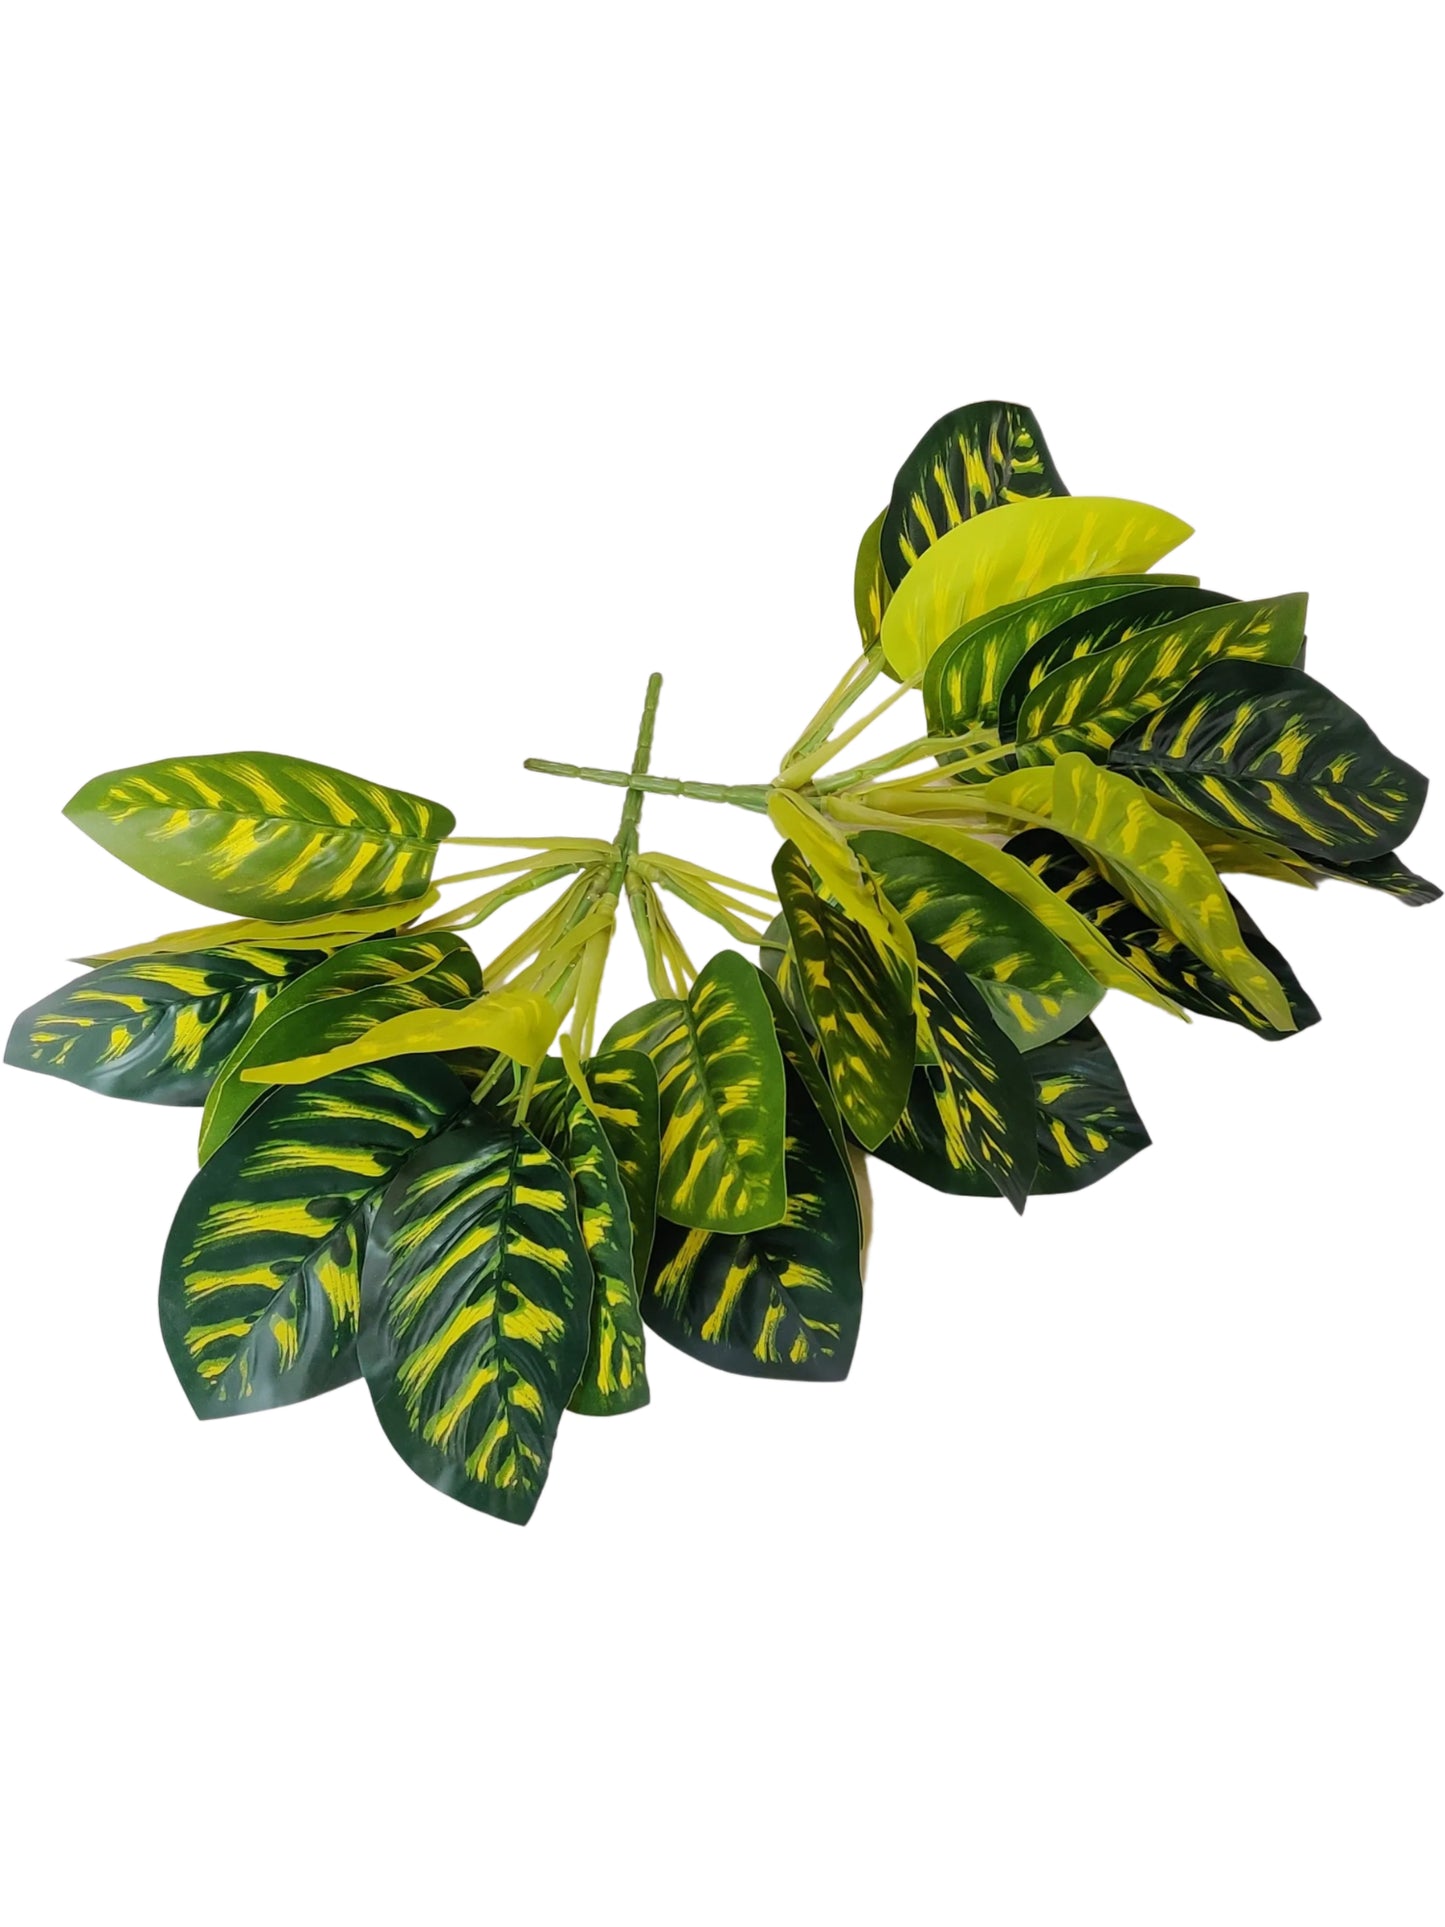 ARTSY Artificial plants for home decor, plant leaves bunch for pot/vase, home/office decor, gift, craft, artificial flowers, without vase, combo, pack 1 piece, 40 cm height, Mix